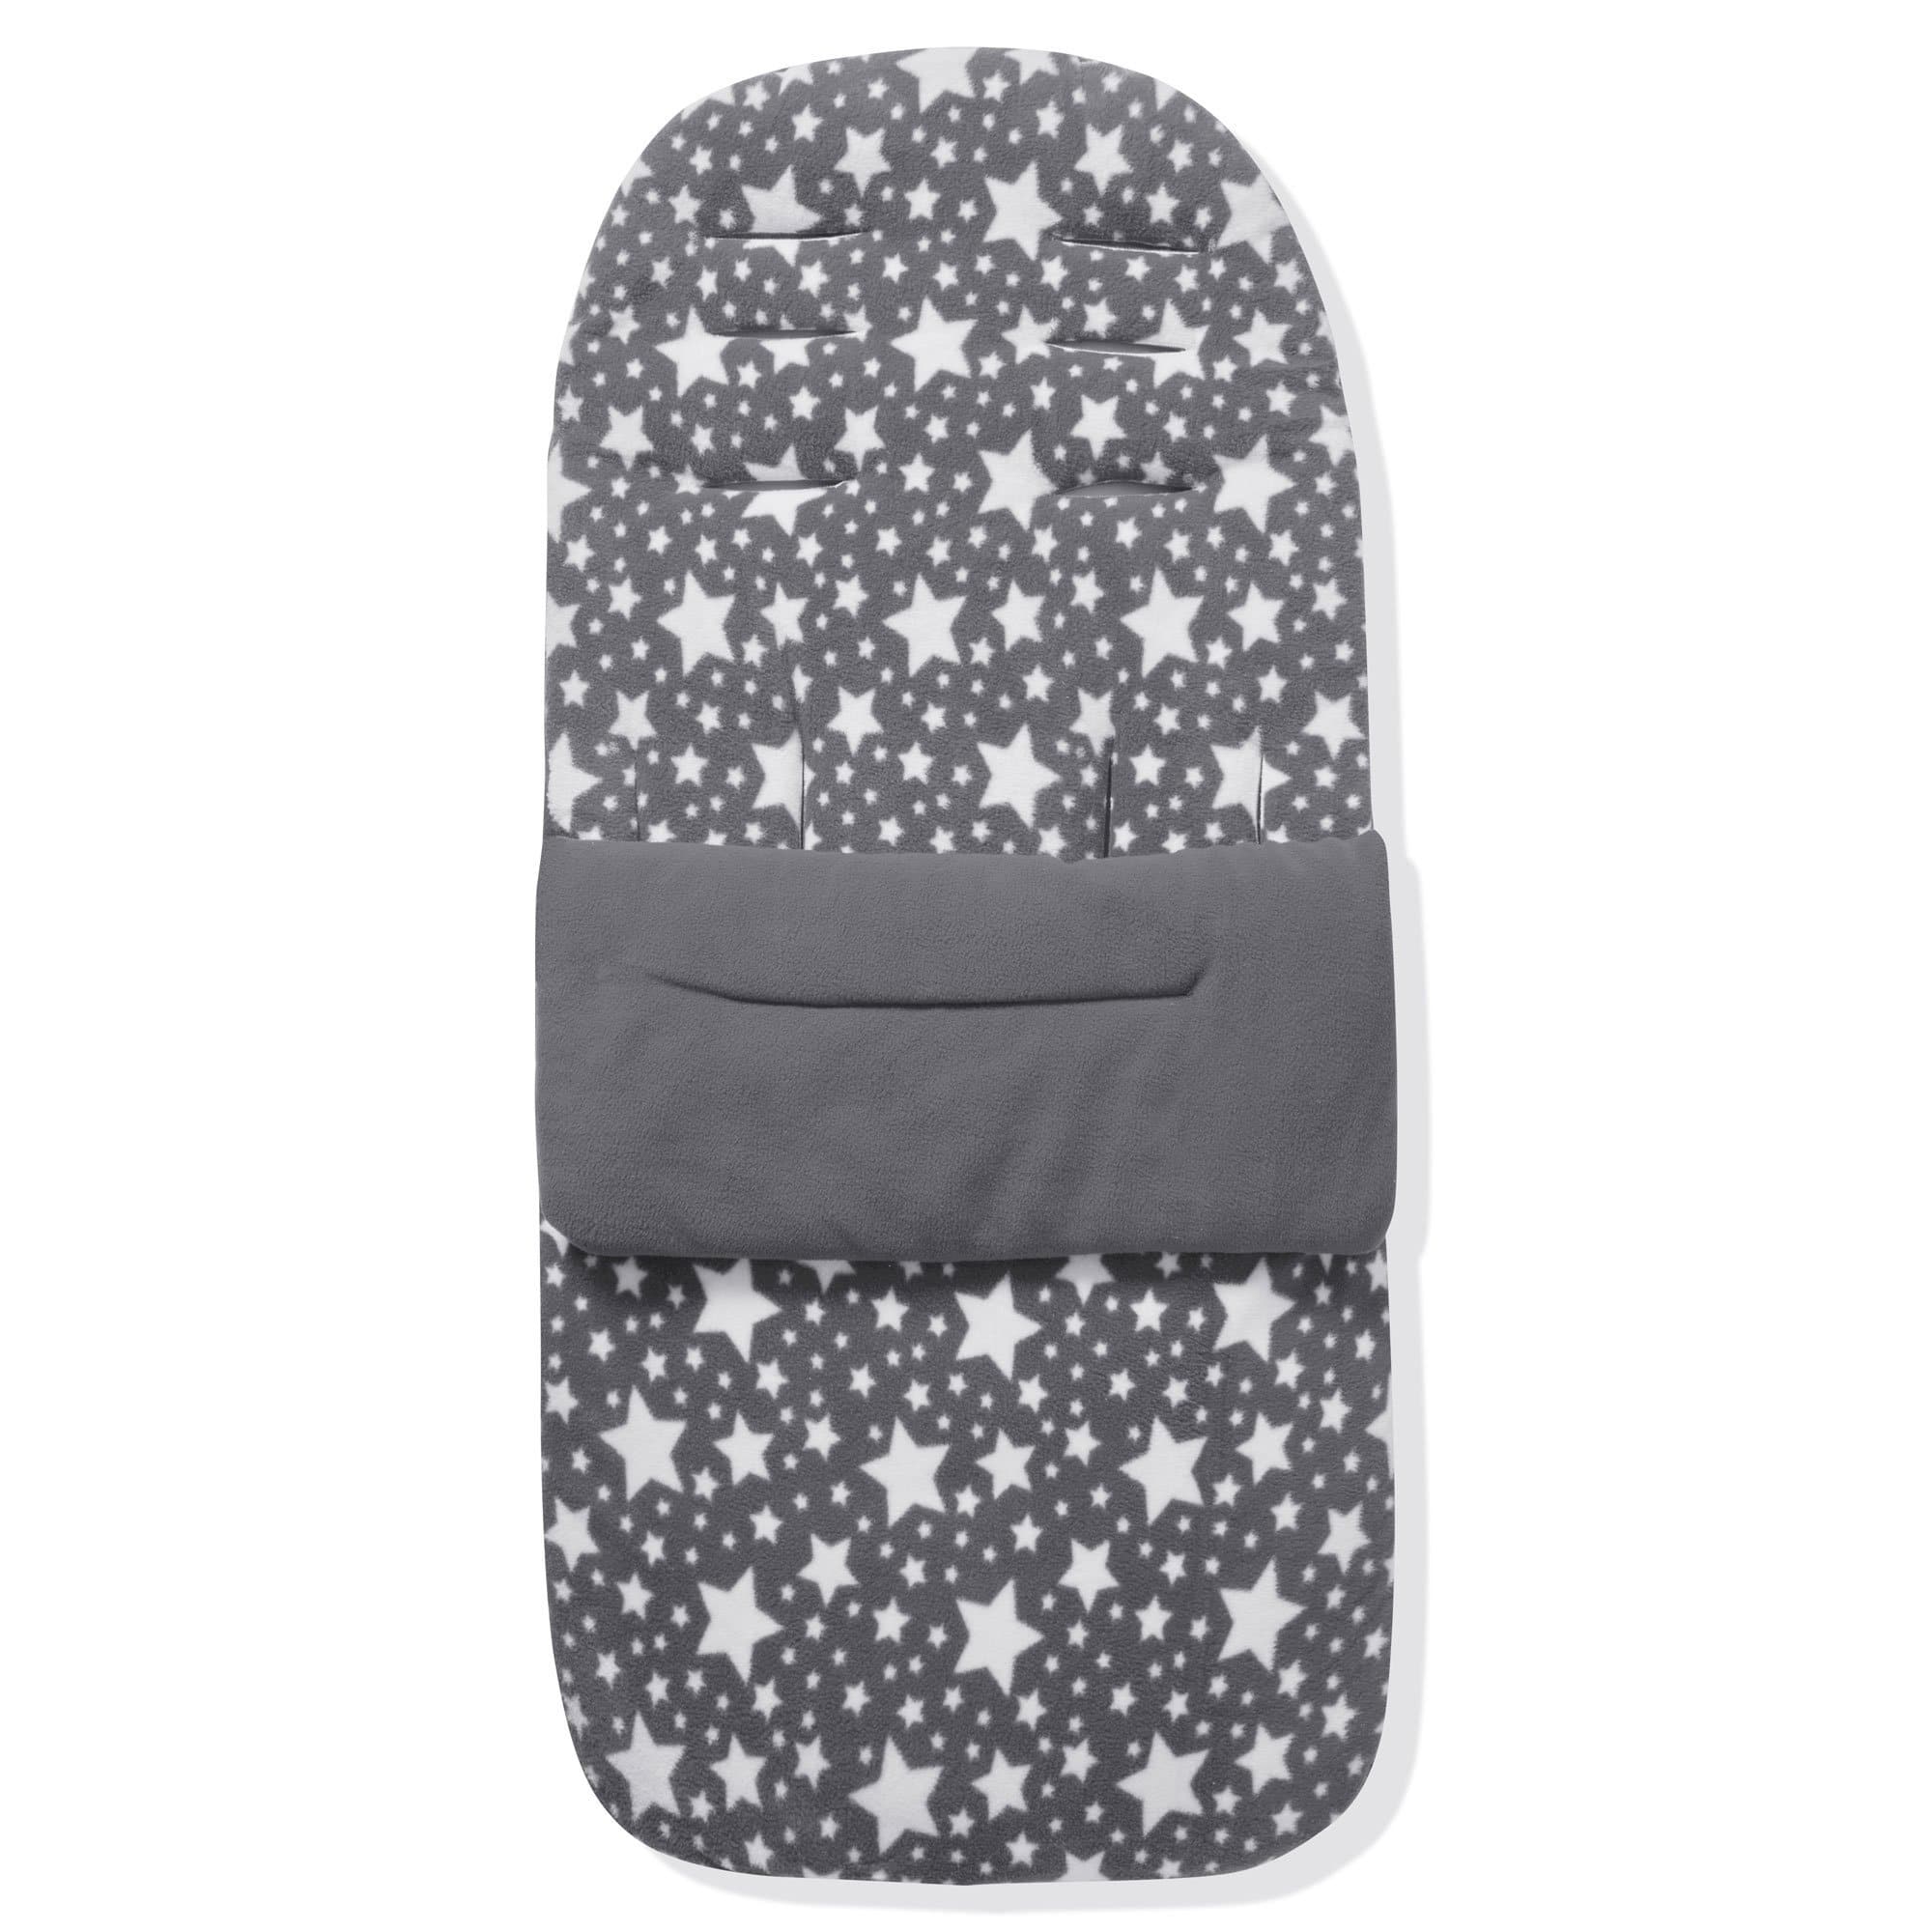 Fleece Footmuff / Cosy Toes Compatible with Kiddicouture - Grey Star / Fits All Models | For Your Little One